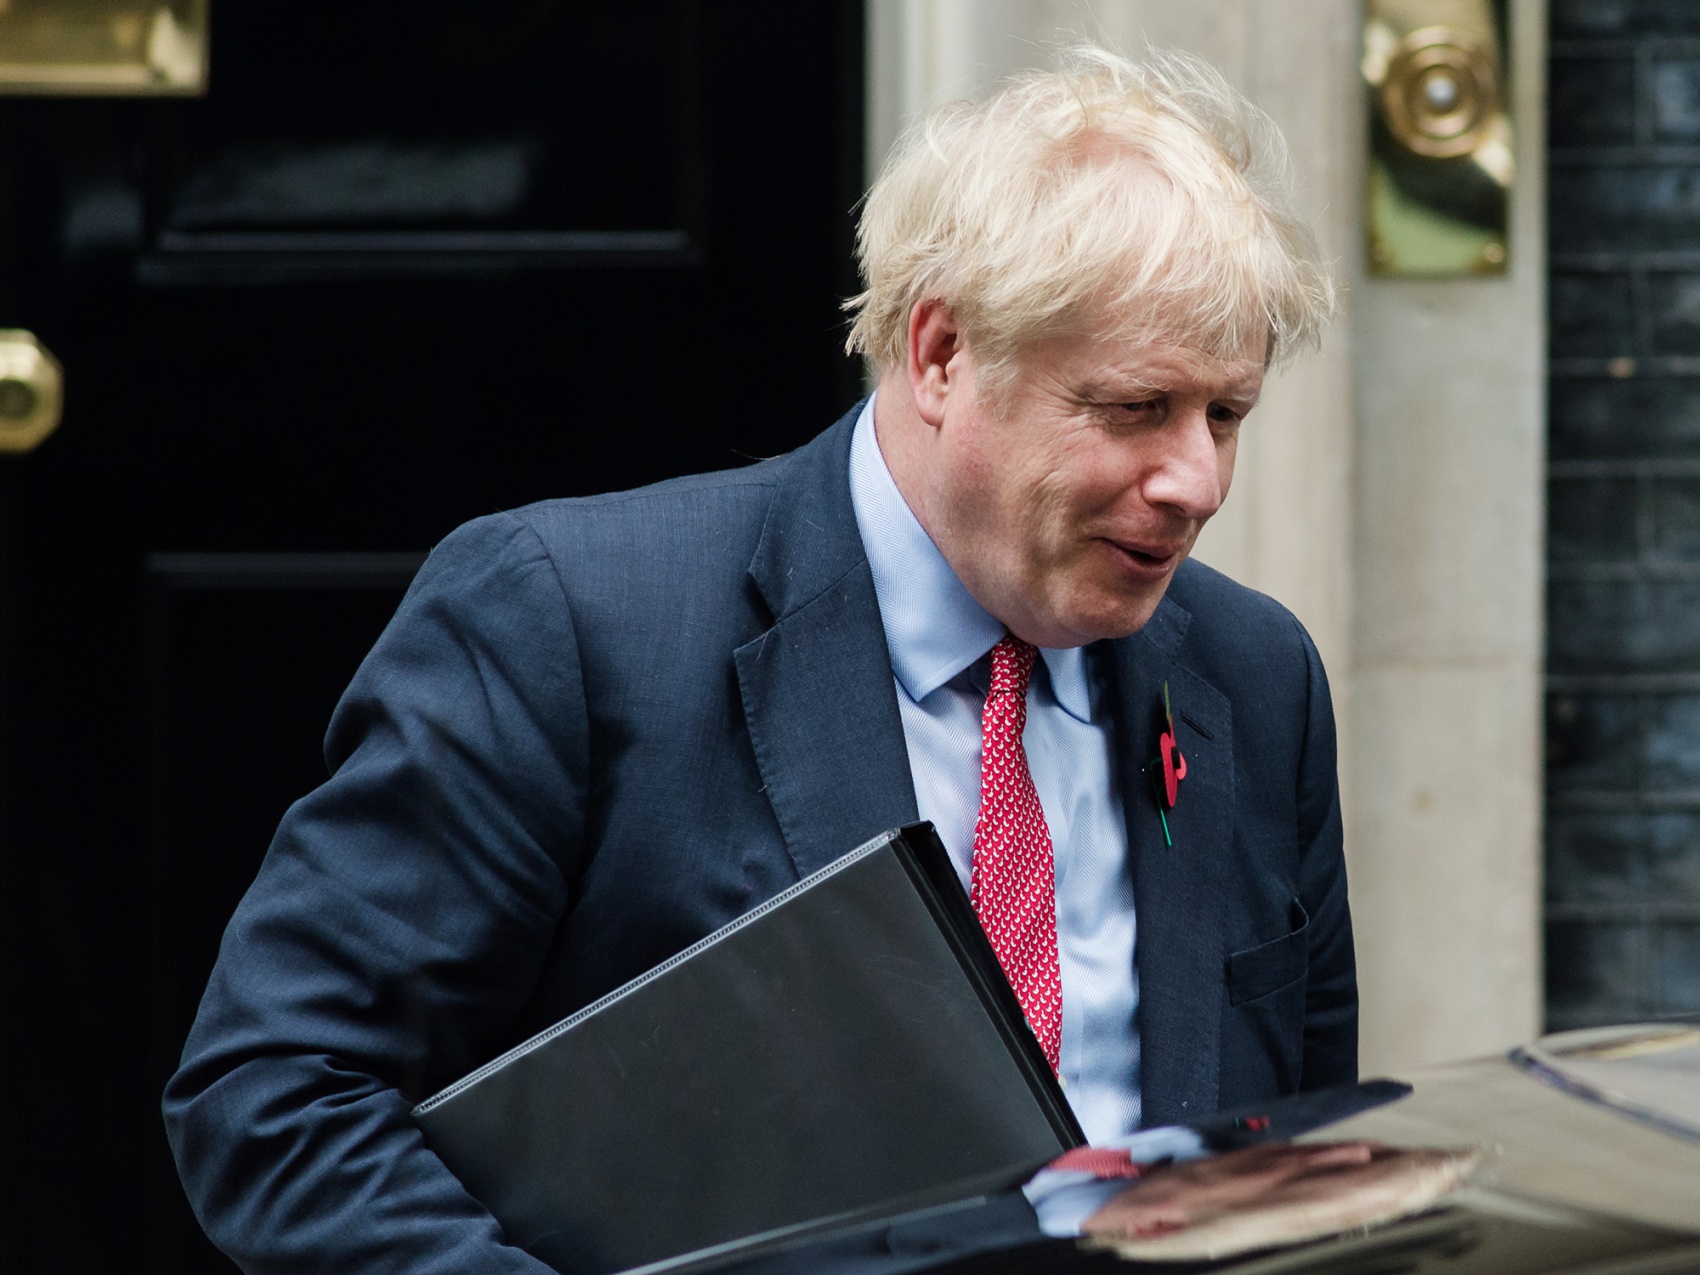 UK Election: What "Naughty" Question Reveals About Boris Johnson - Bloomberg